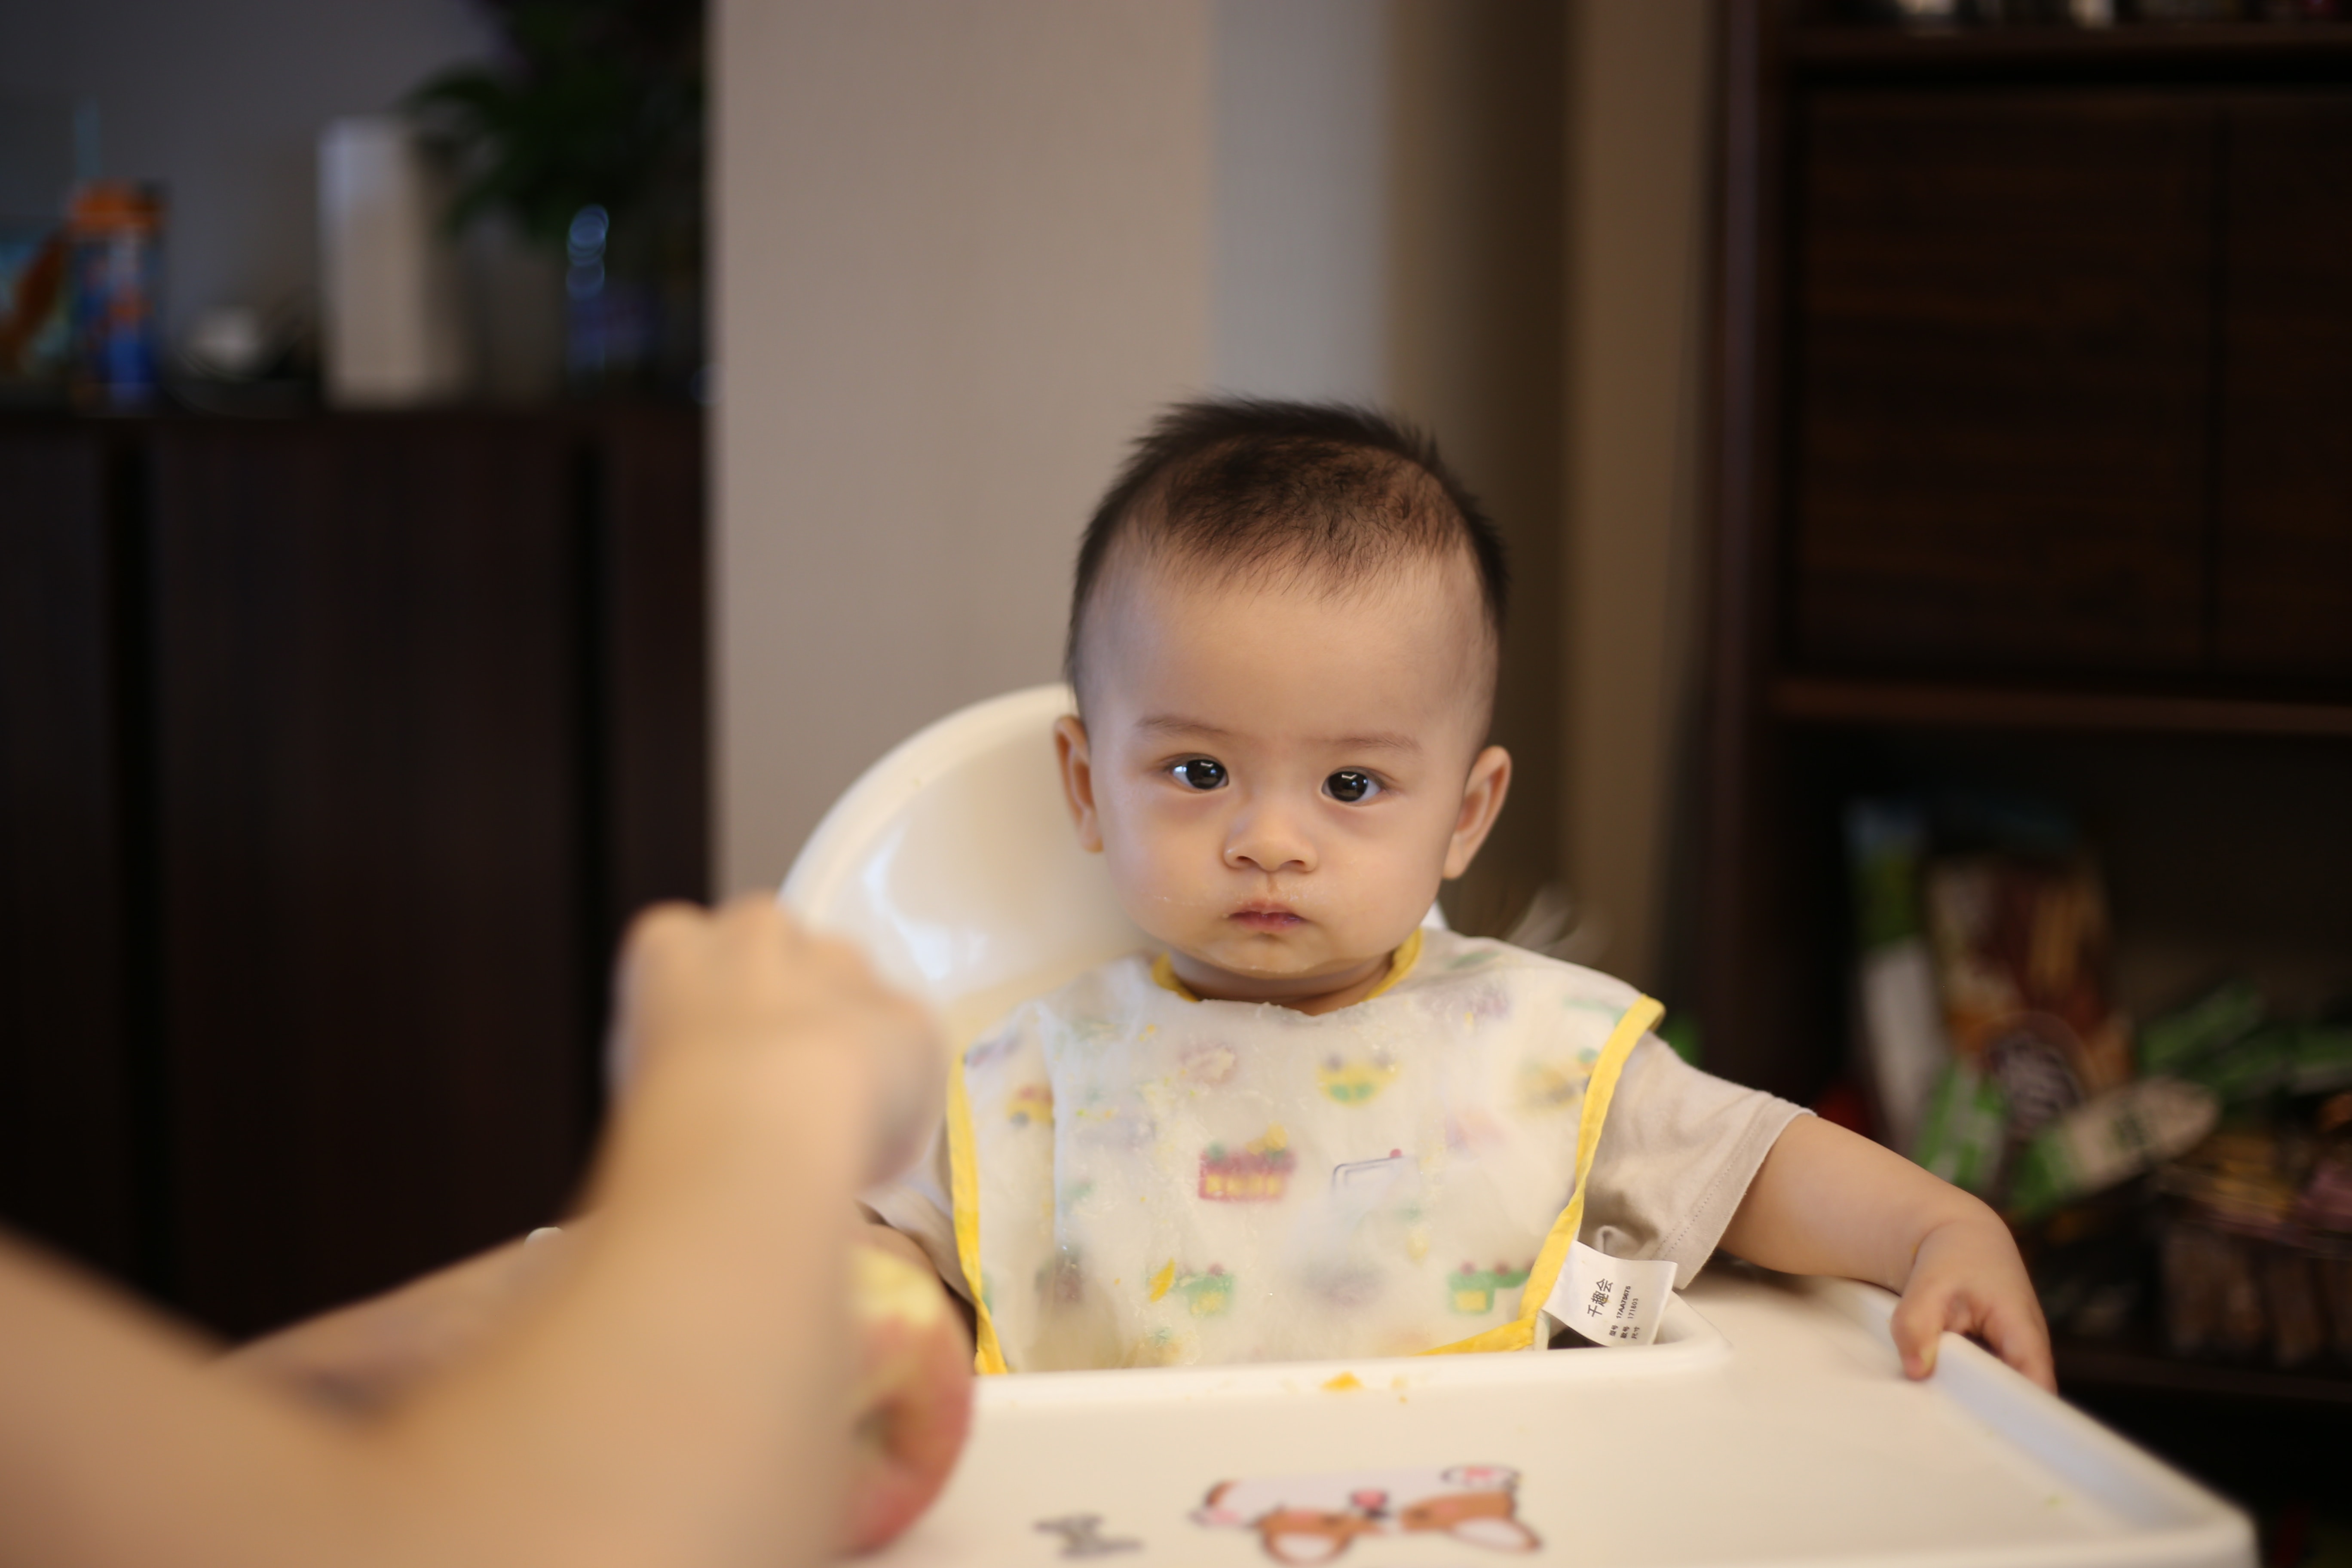 A baby of around 6 months of ages sits in a high chair with an adult's partly visible to the side of the image